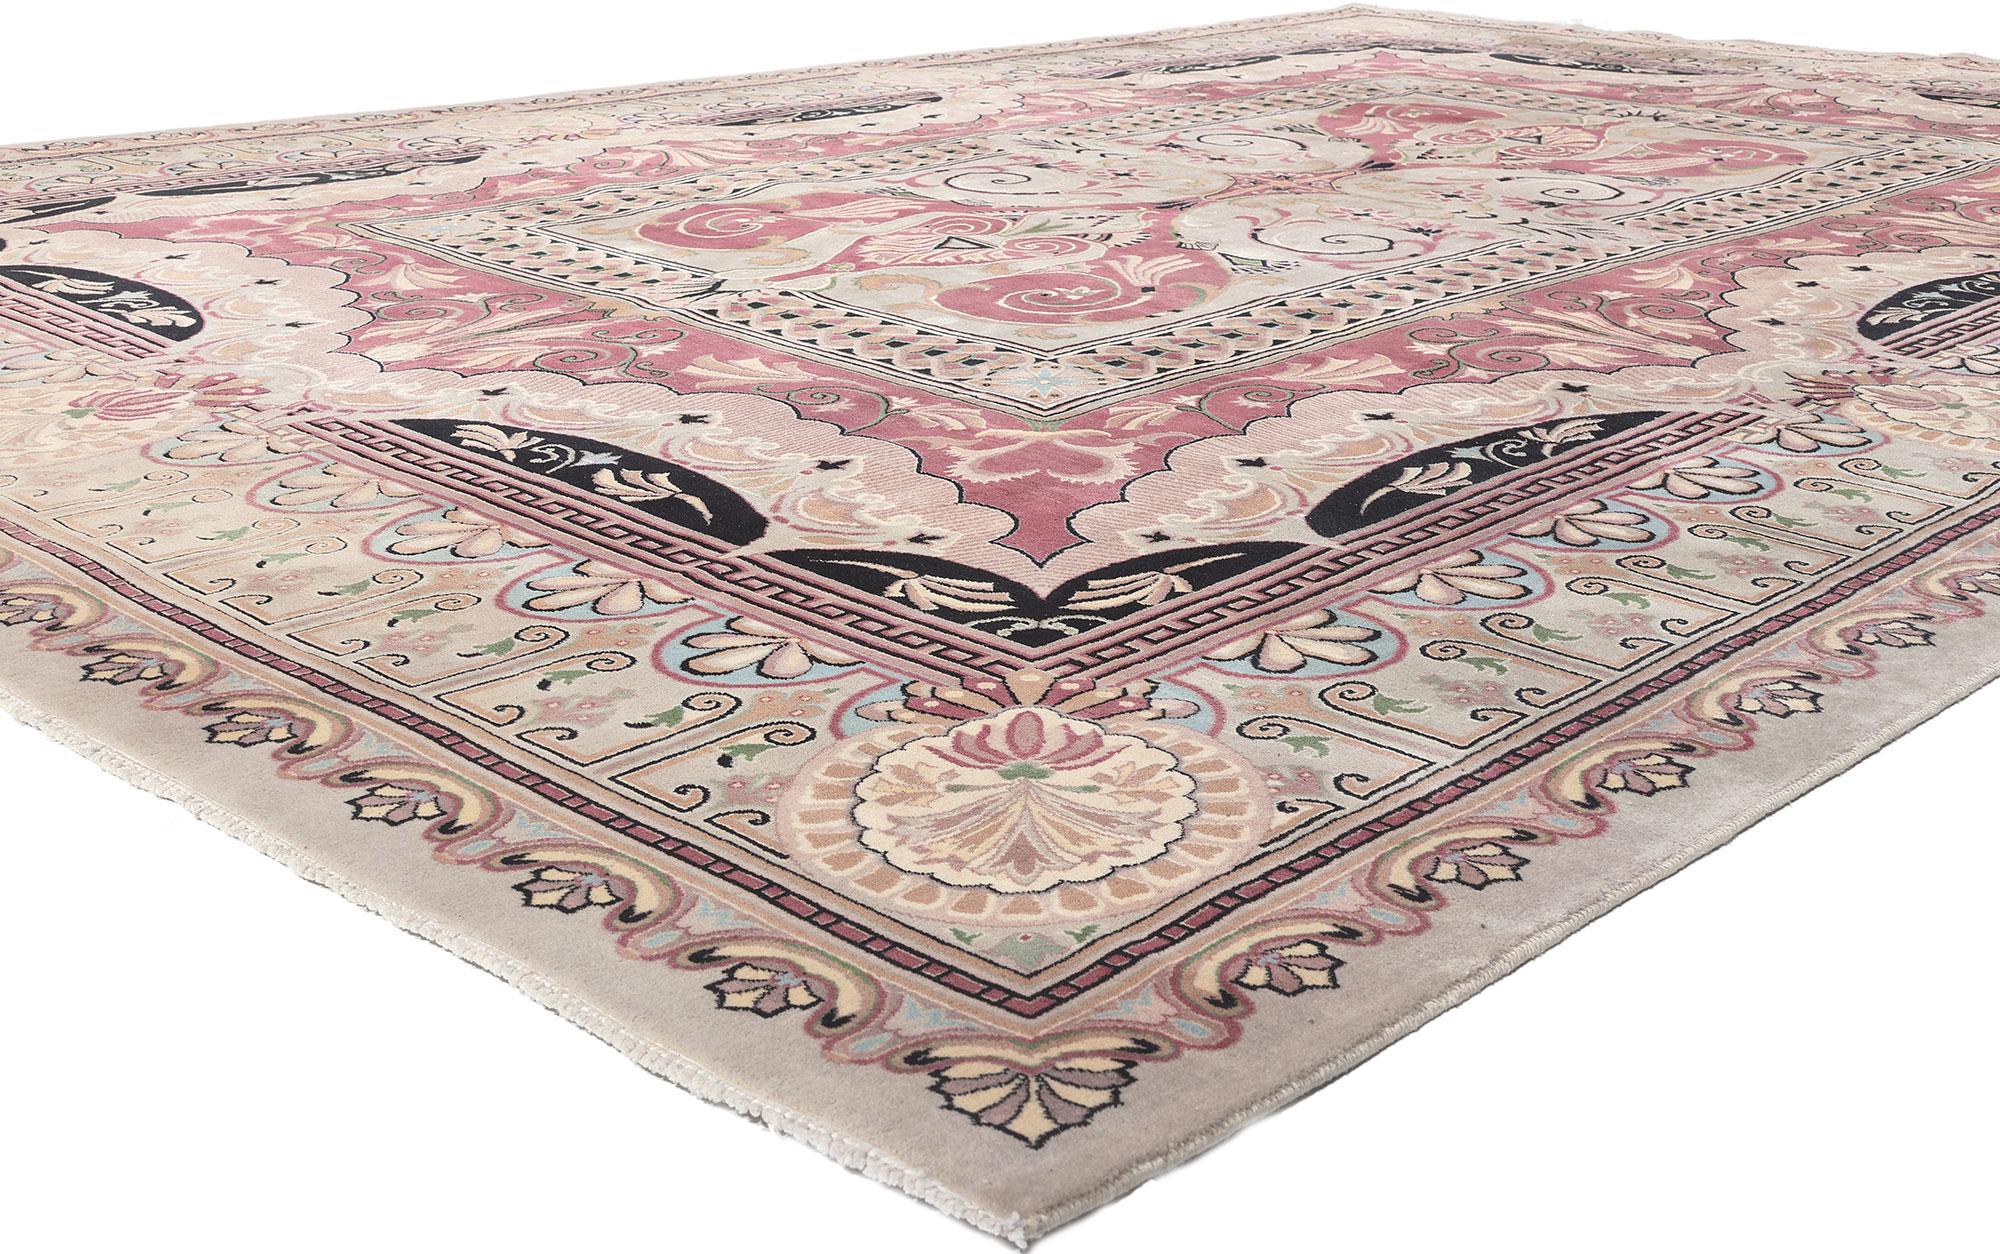 78564 New French Aubusson Savonnerie Style Rug, 10'00 x 14'02.
Emulating pure decadence with incredible detail and texture, this French Aubusson style rug is a captivating vision of woven beauty. The intricate embellishments and soft colors woven